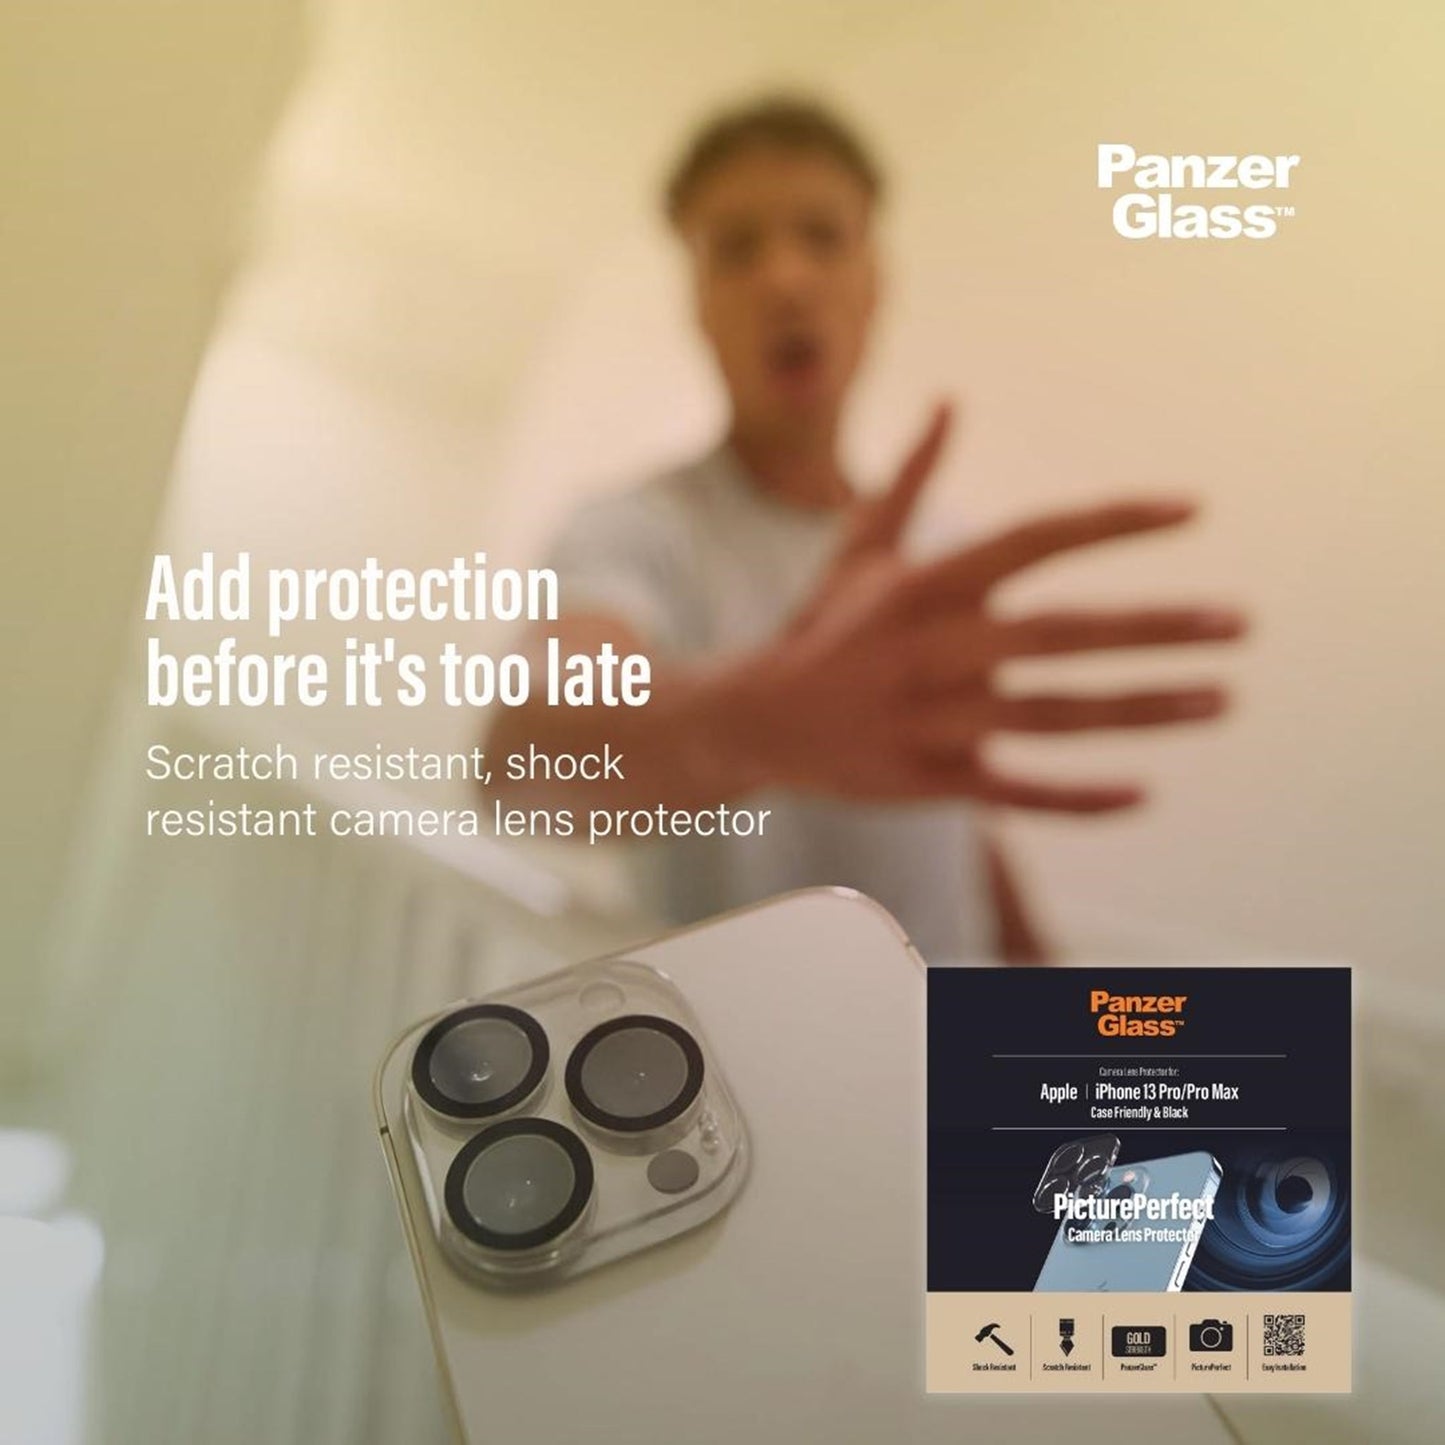 PanzerGlass™ PicturePerfect Camera Lens Protector Apple iPhone 13 Pro | Pro Max 10